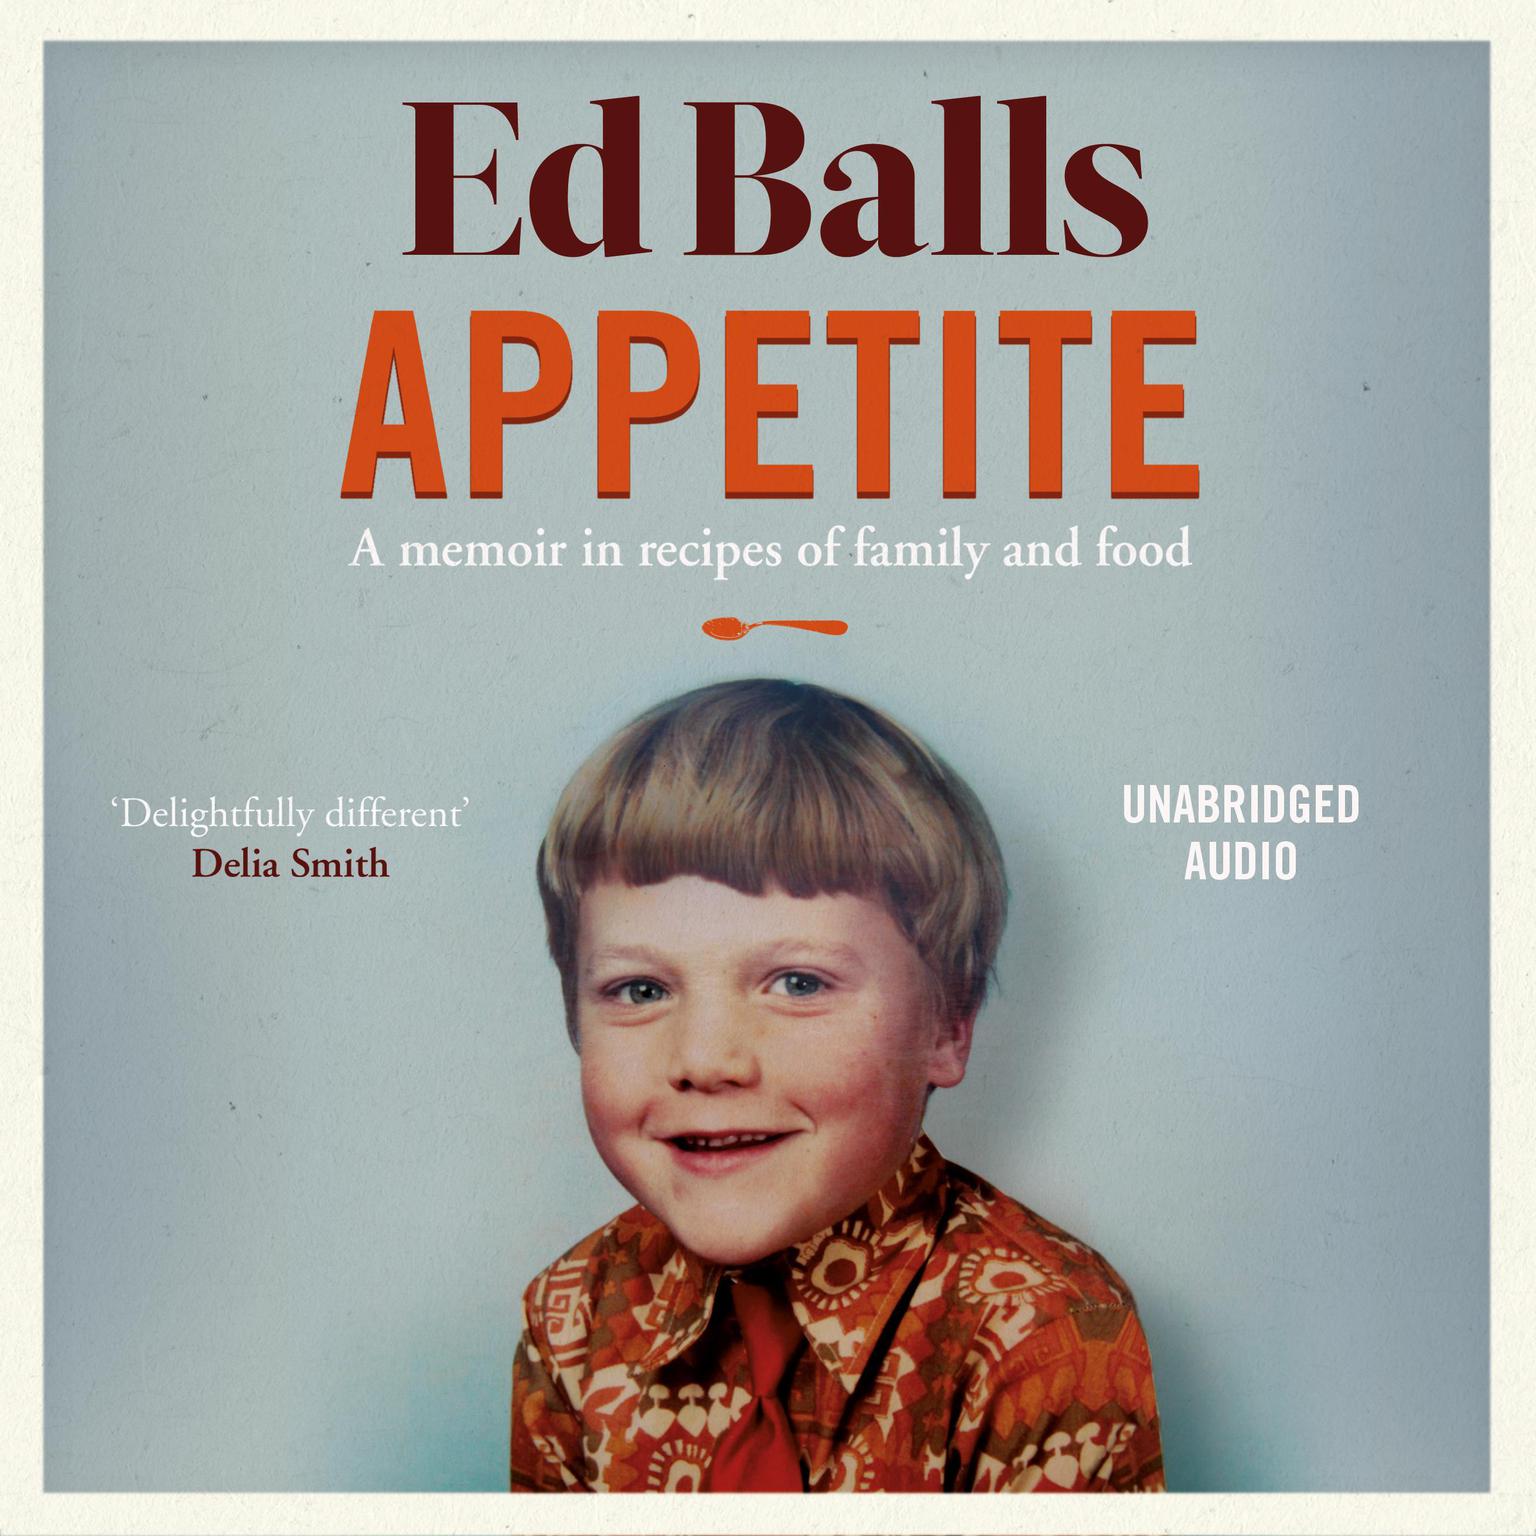 Appetite (Abridged): A Memoir in Recipes of Family and Food Audiobook, by Ed Balls